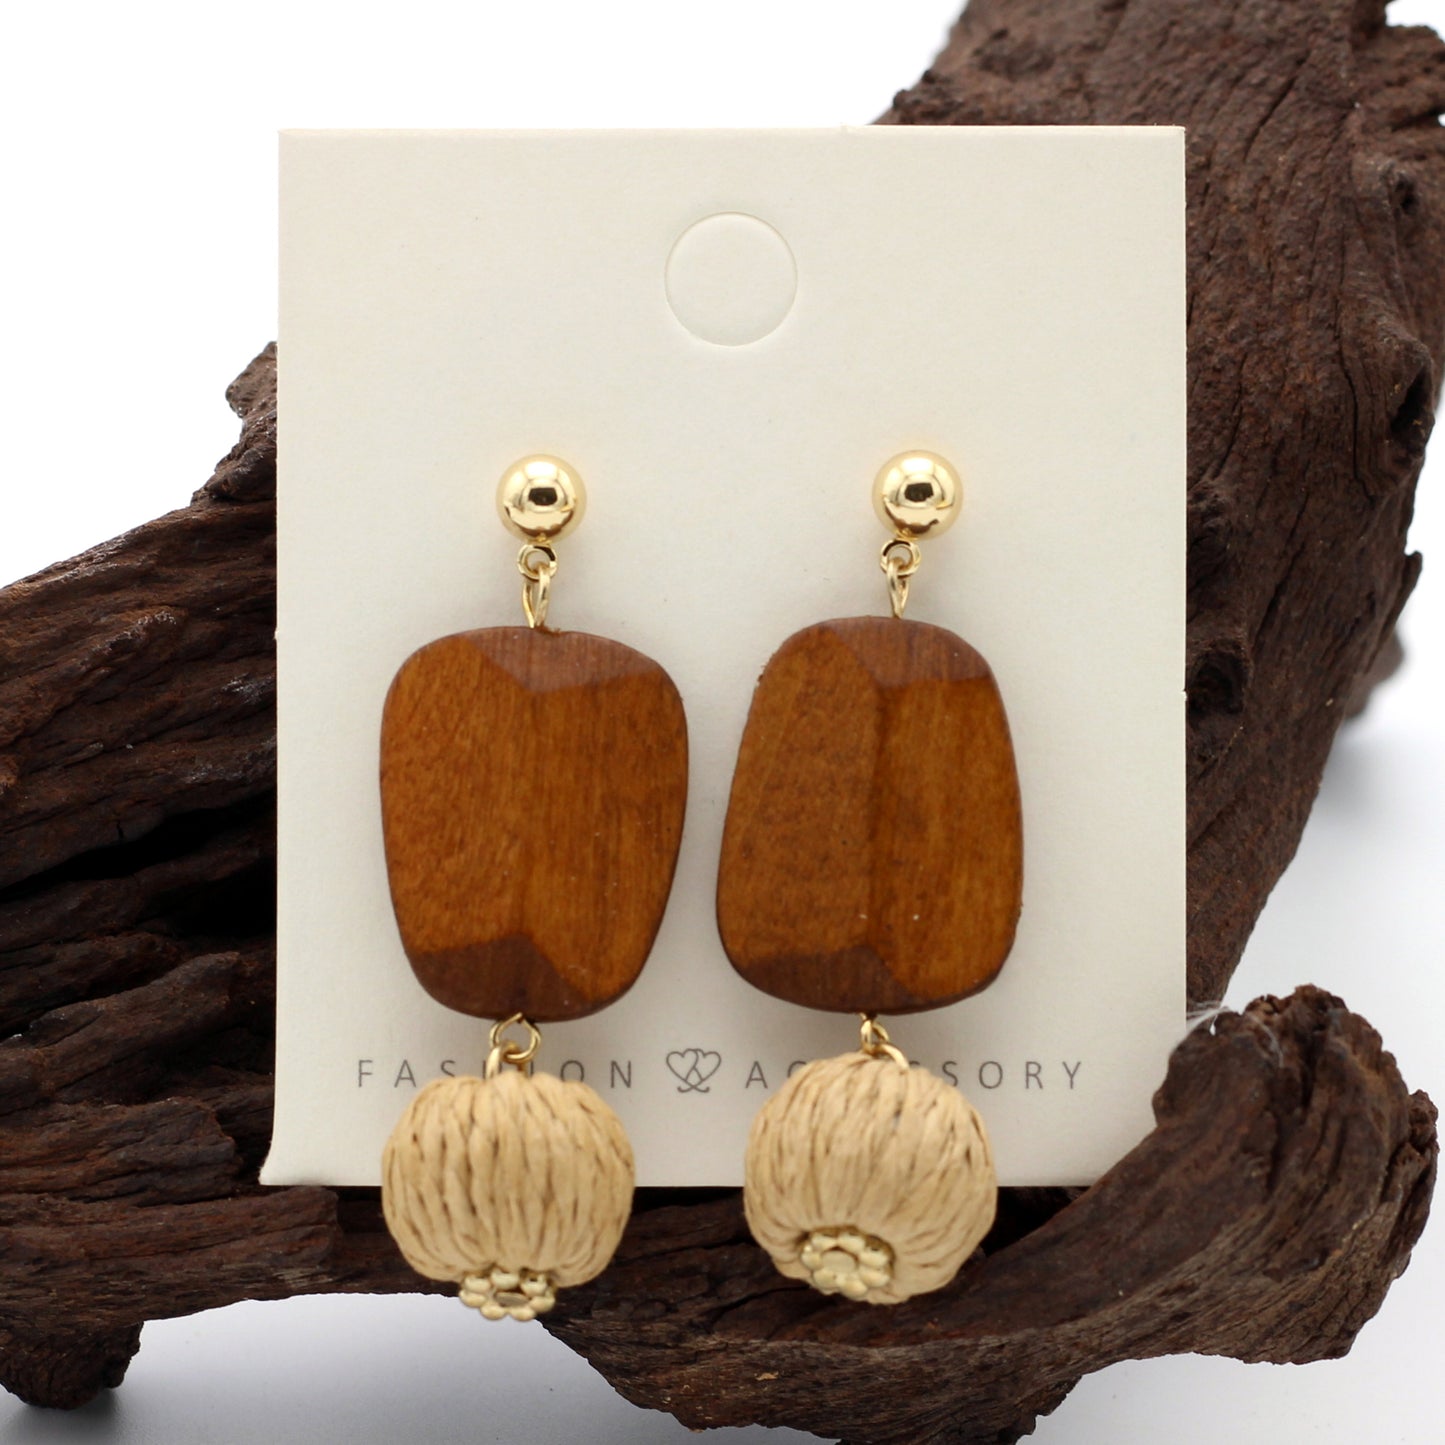 Wood and natural rattan earrings by Hashtag Bamboo